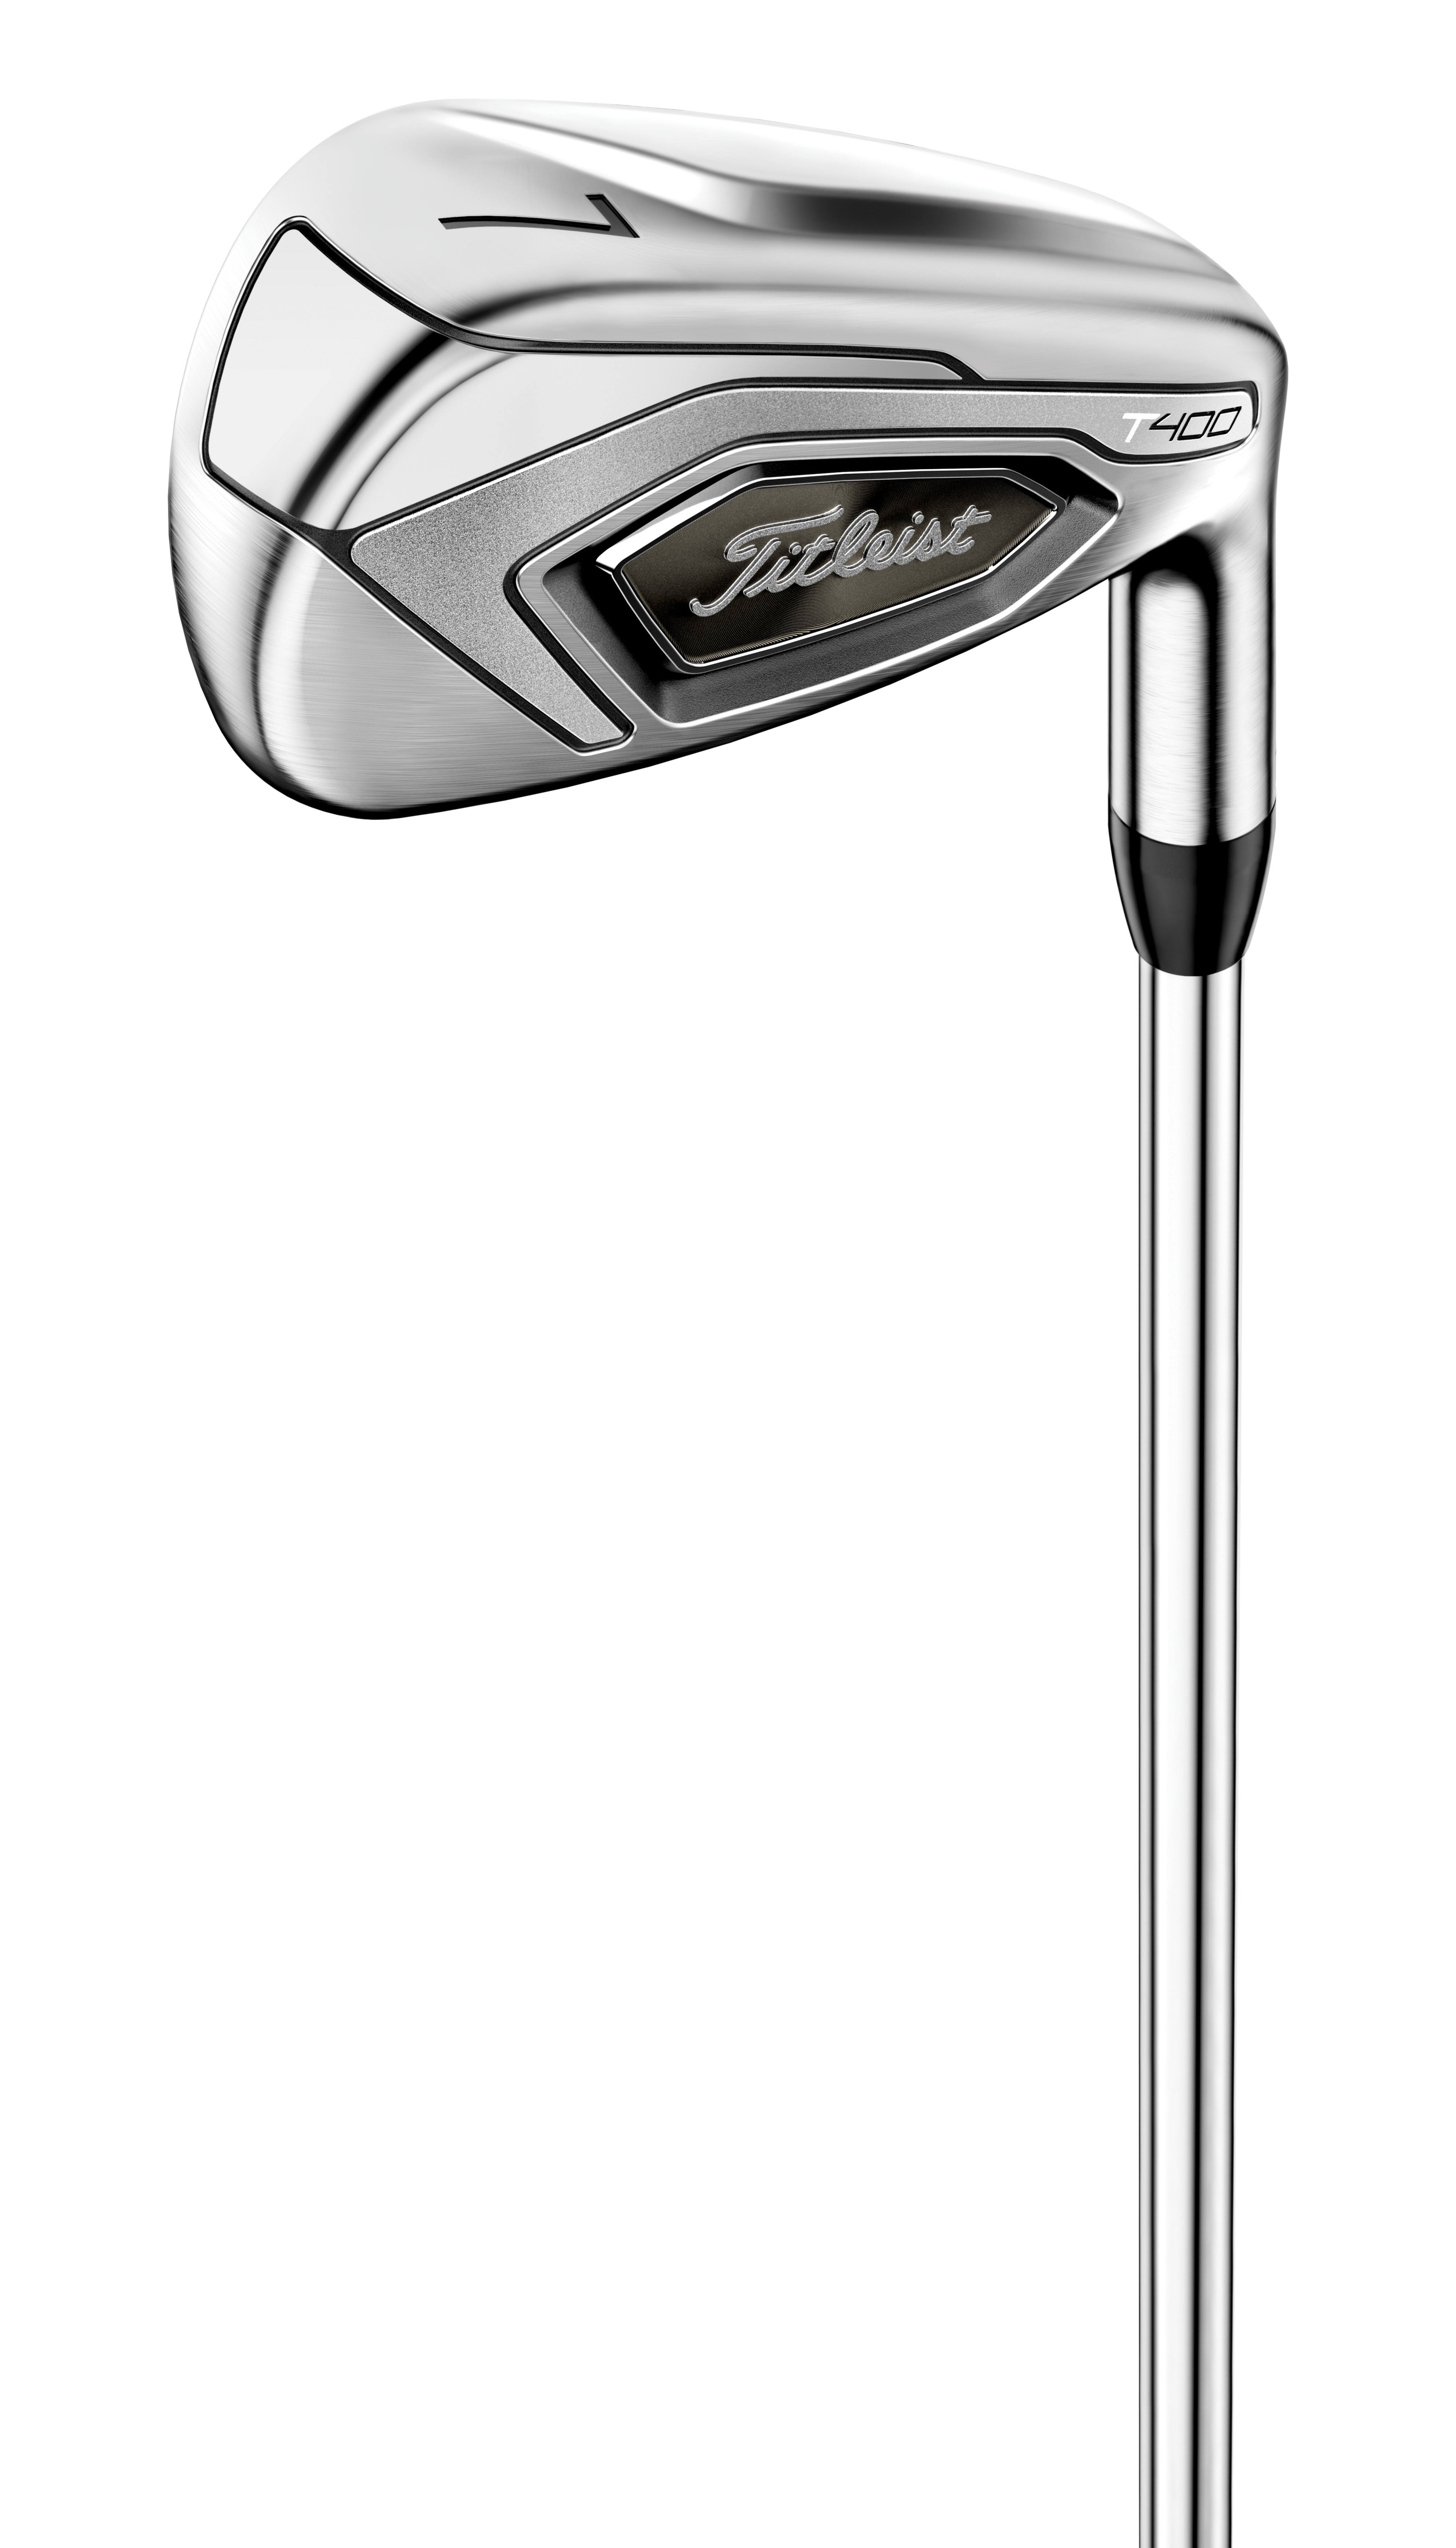 Titleist's T400 iron is super strong lofted and perhaps could be